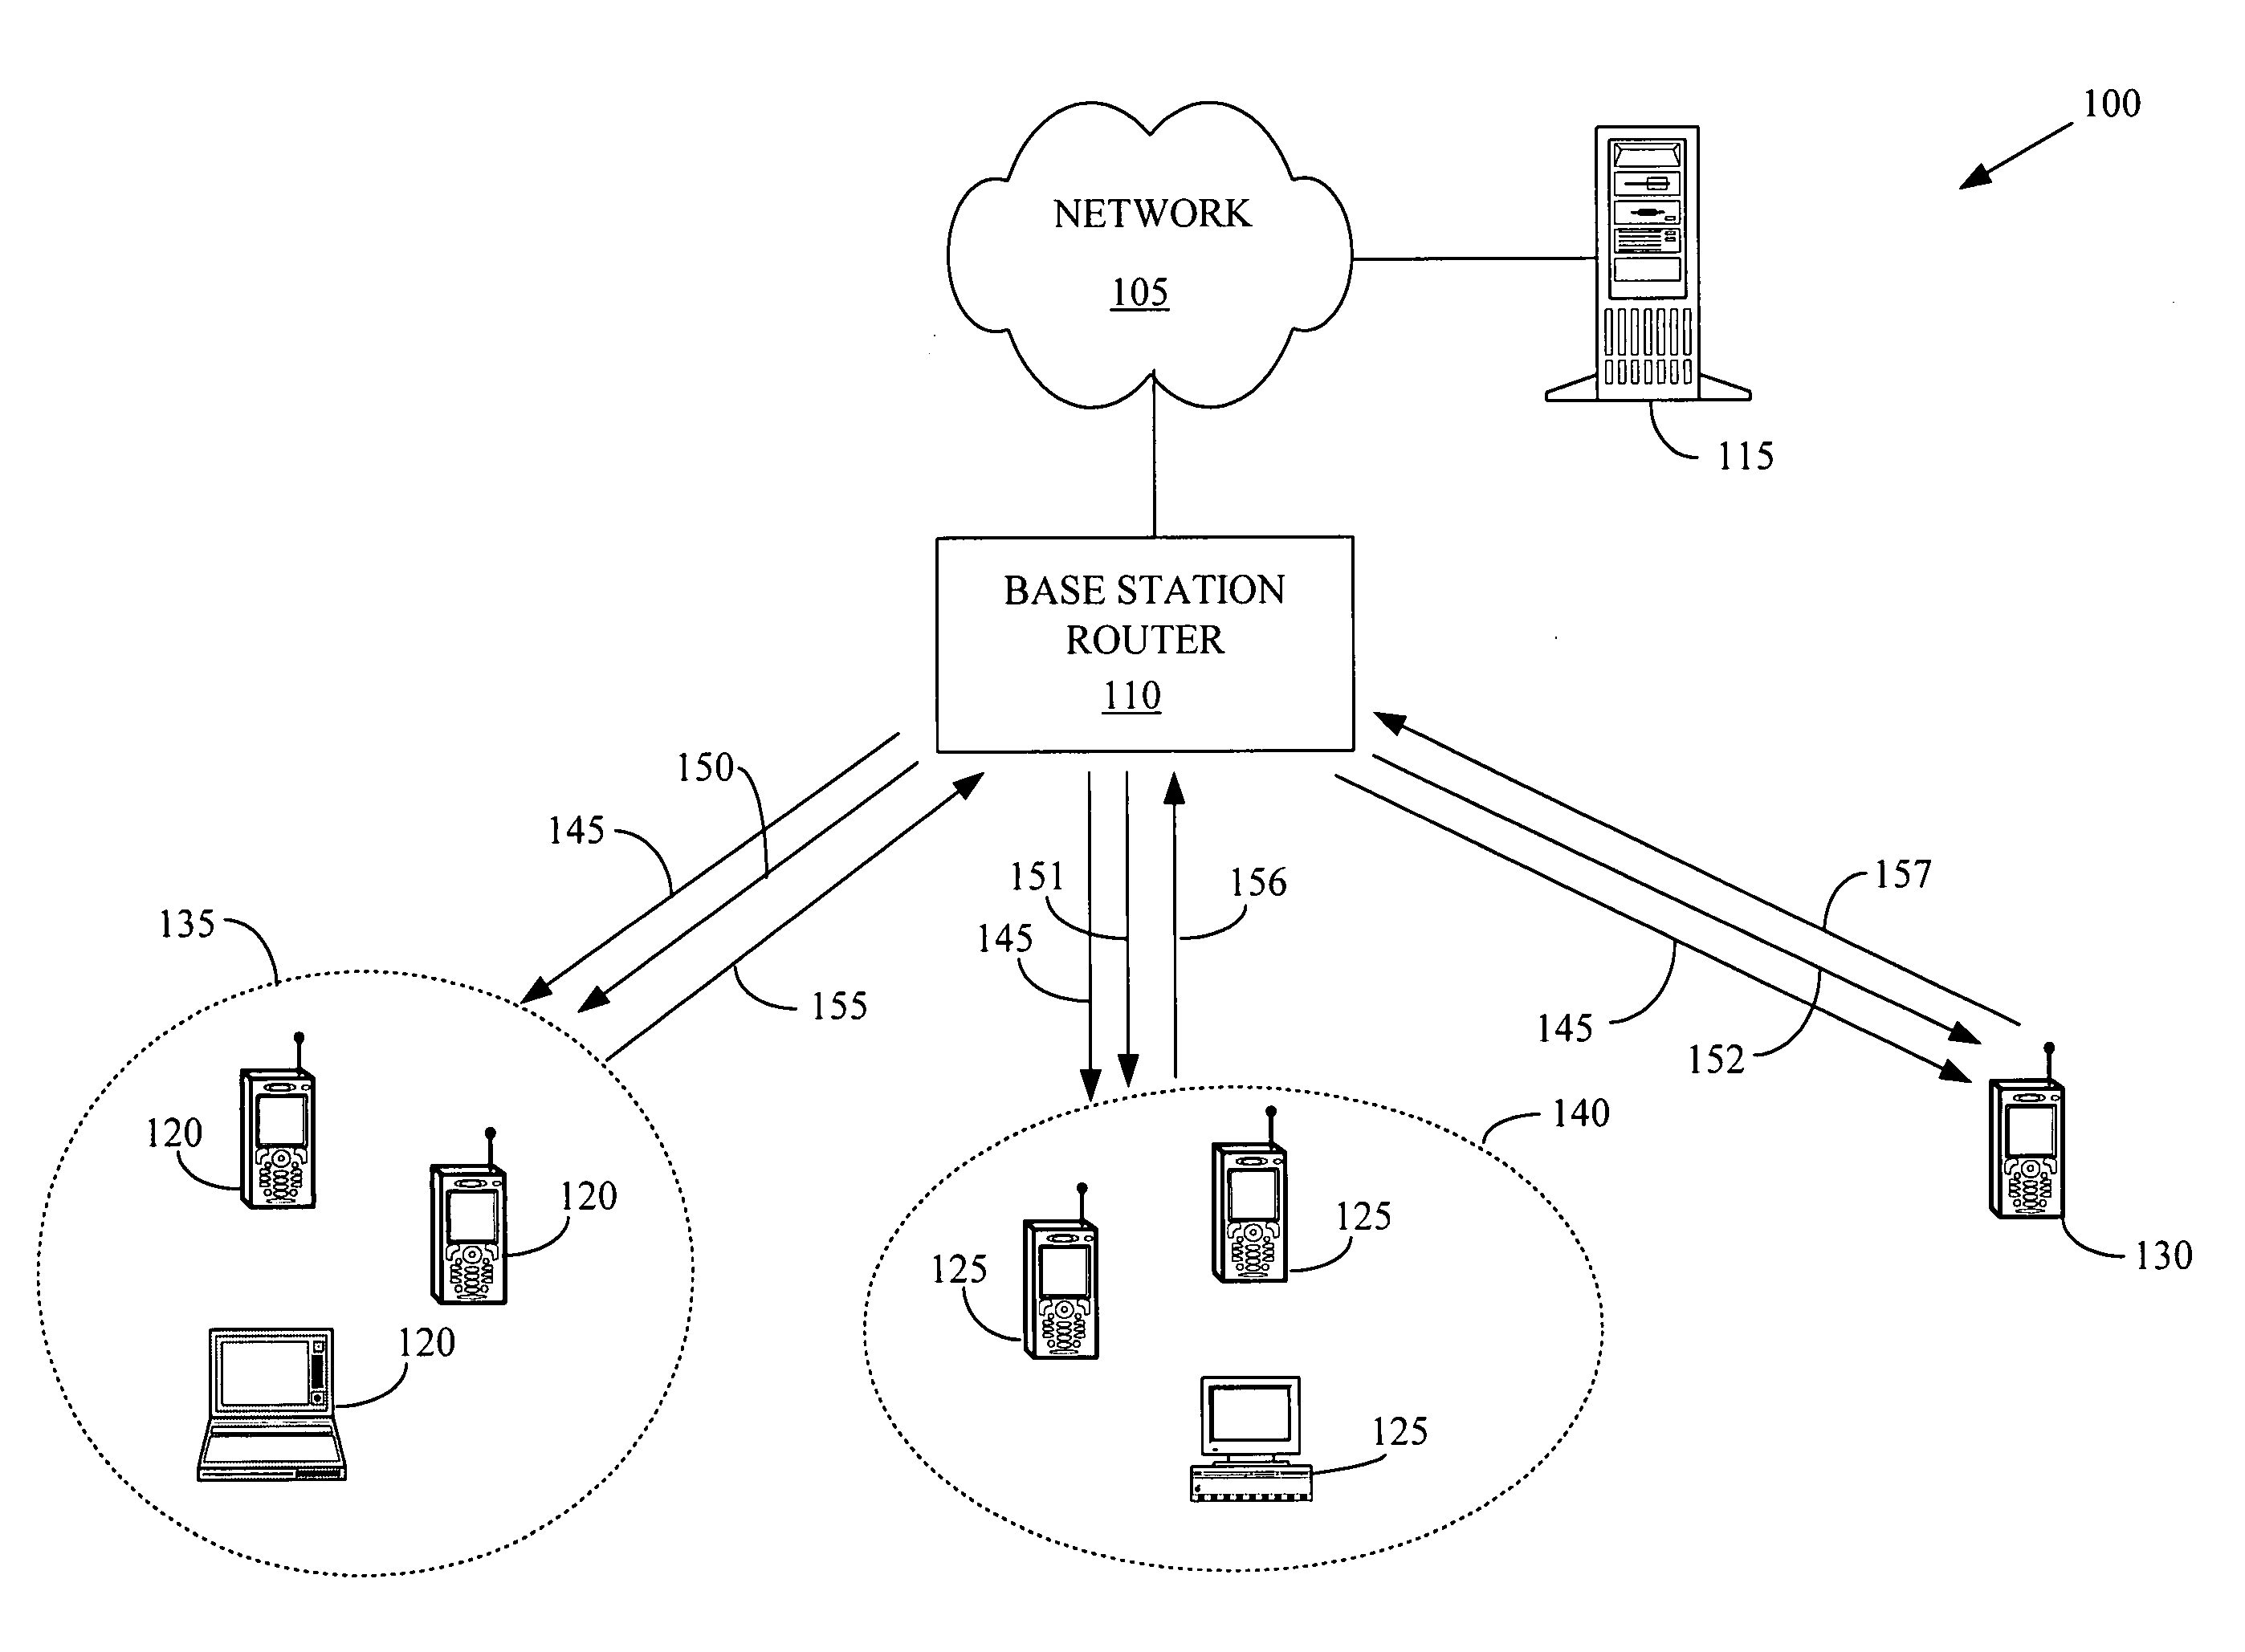 Method for associating multiple users with a shared downlink channel